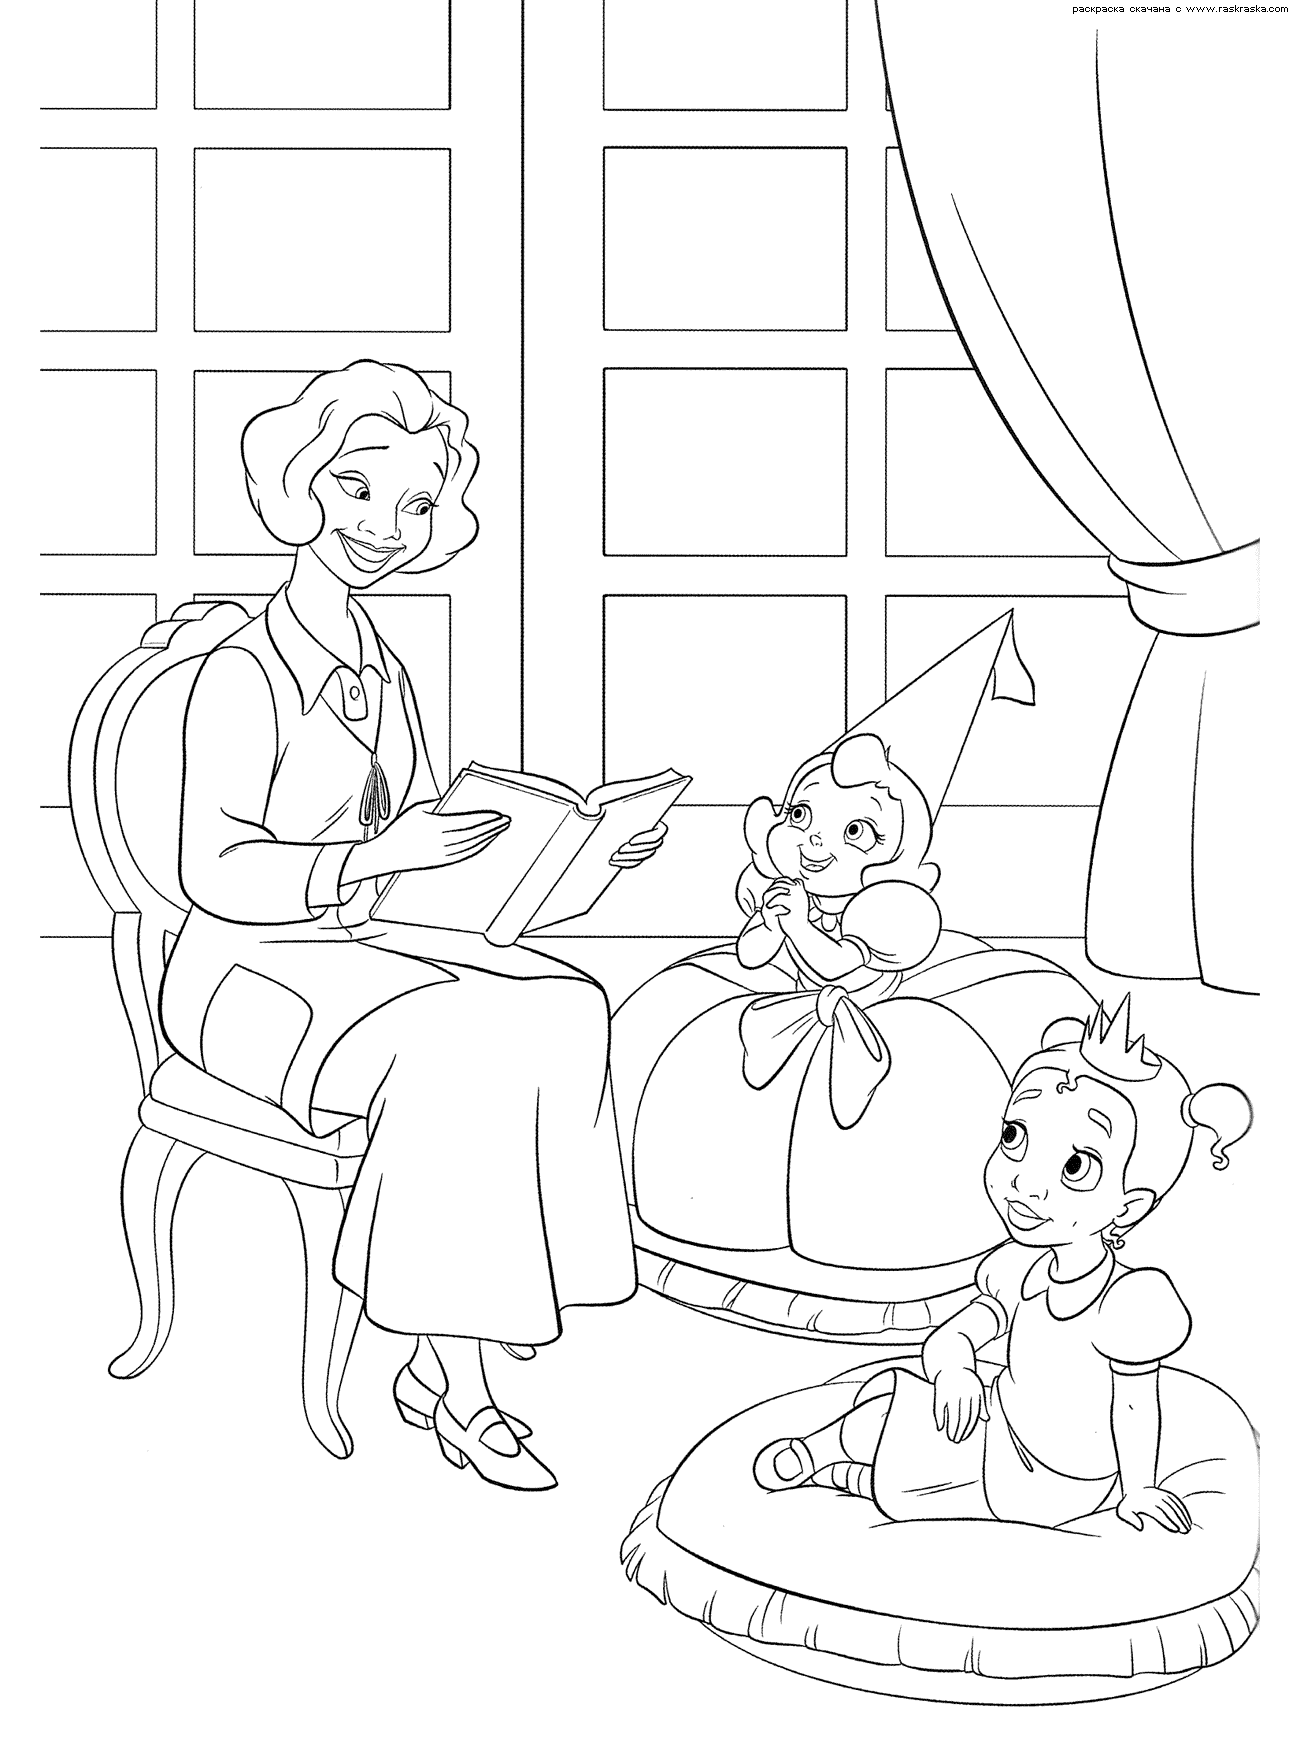 Mom and daughter Coloring pages 🖌 to print and color